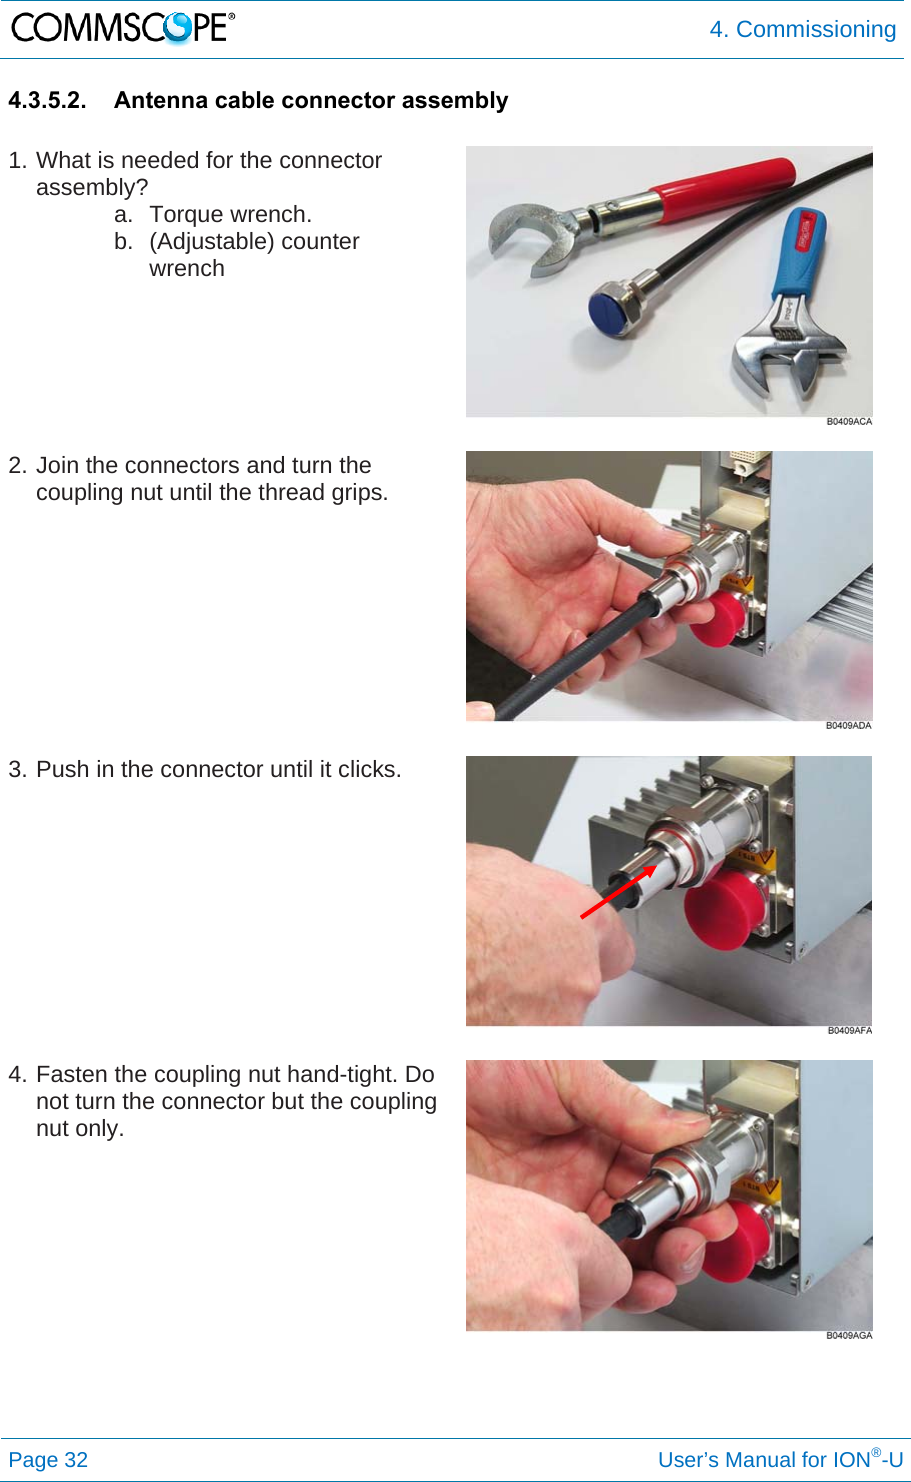  4. Commissioning Page 32     User’s Manual for ION®-U 4.3.5.2.  Antenna cable connector assembly  1. What is needed for the connector assembly? a. Torque wrench. b. (Adjustable) counter wrench   2. Join the connectors and turn the coupling nut until the thread grips.   3. Push in the connector until it clicks.   4. Fasten the coupling nut hand-tight. Do not turn the connector but the coupling nut only.    